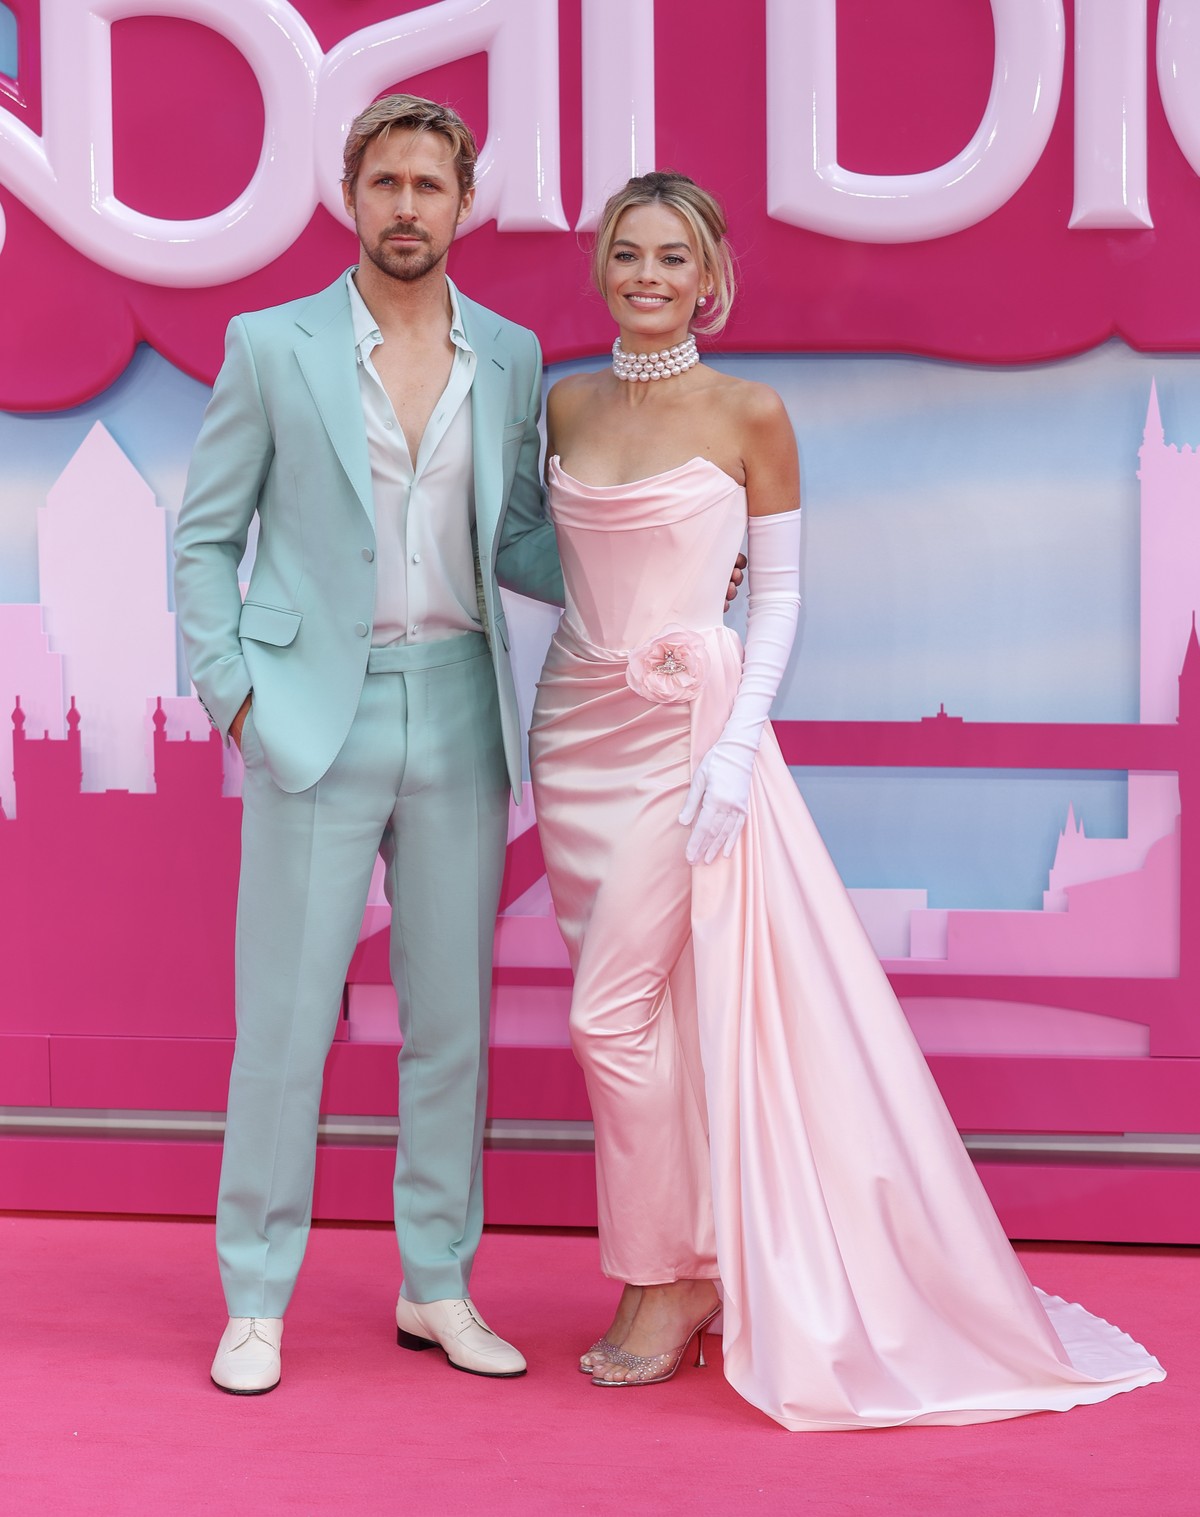 In London, Margot Robbie steals the show with an iconic look inspired by classic ’60s Barbie news